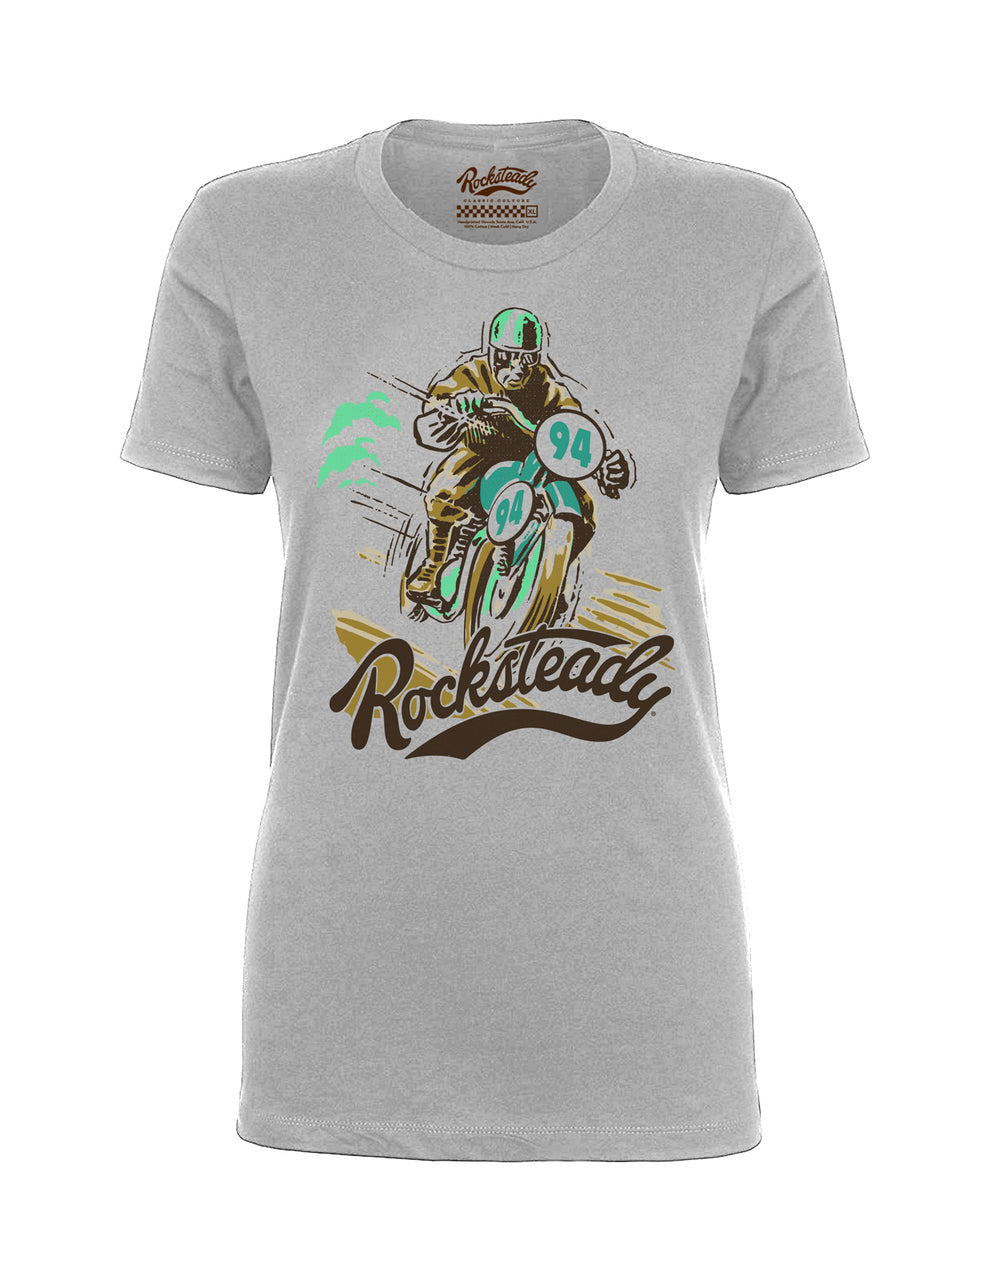 Steady Rocksteady Solo Racer Ladies T-Shirt Steady Canada grey womens tee shirt with cafe racer motorcycle motorbike in green graphic with Rocksteady logo retro vintage pinup rockabilly ladies top Canadian Pin-Up Shop Suzie's Bombshell Boutique Port Dover